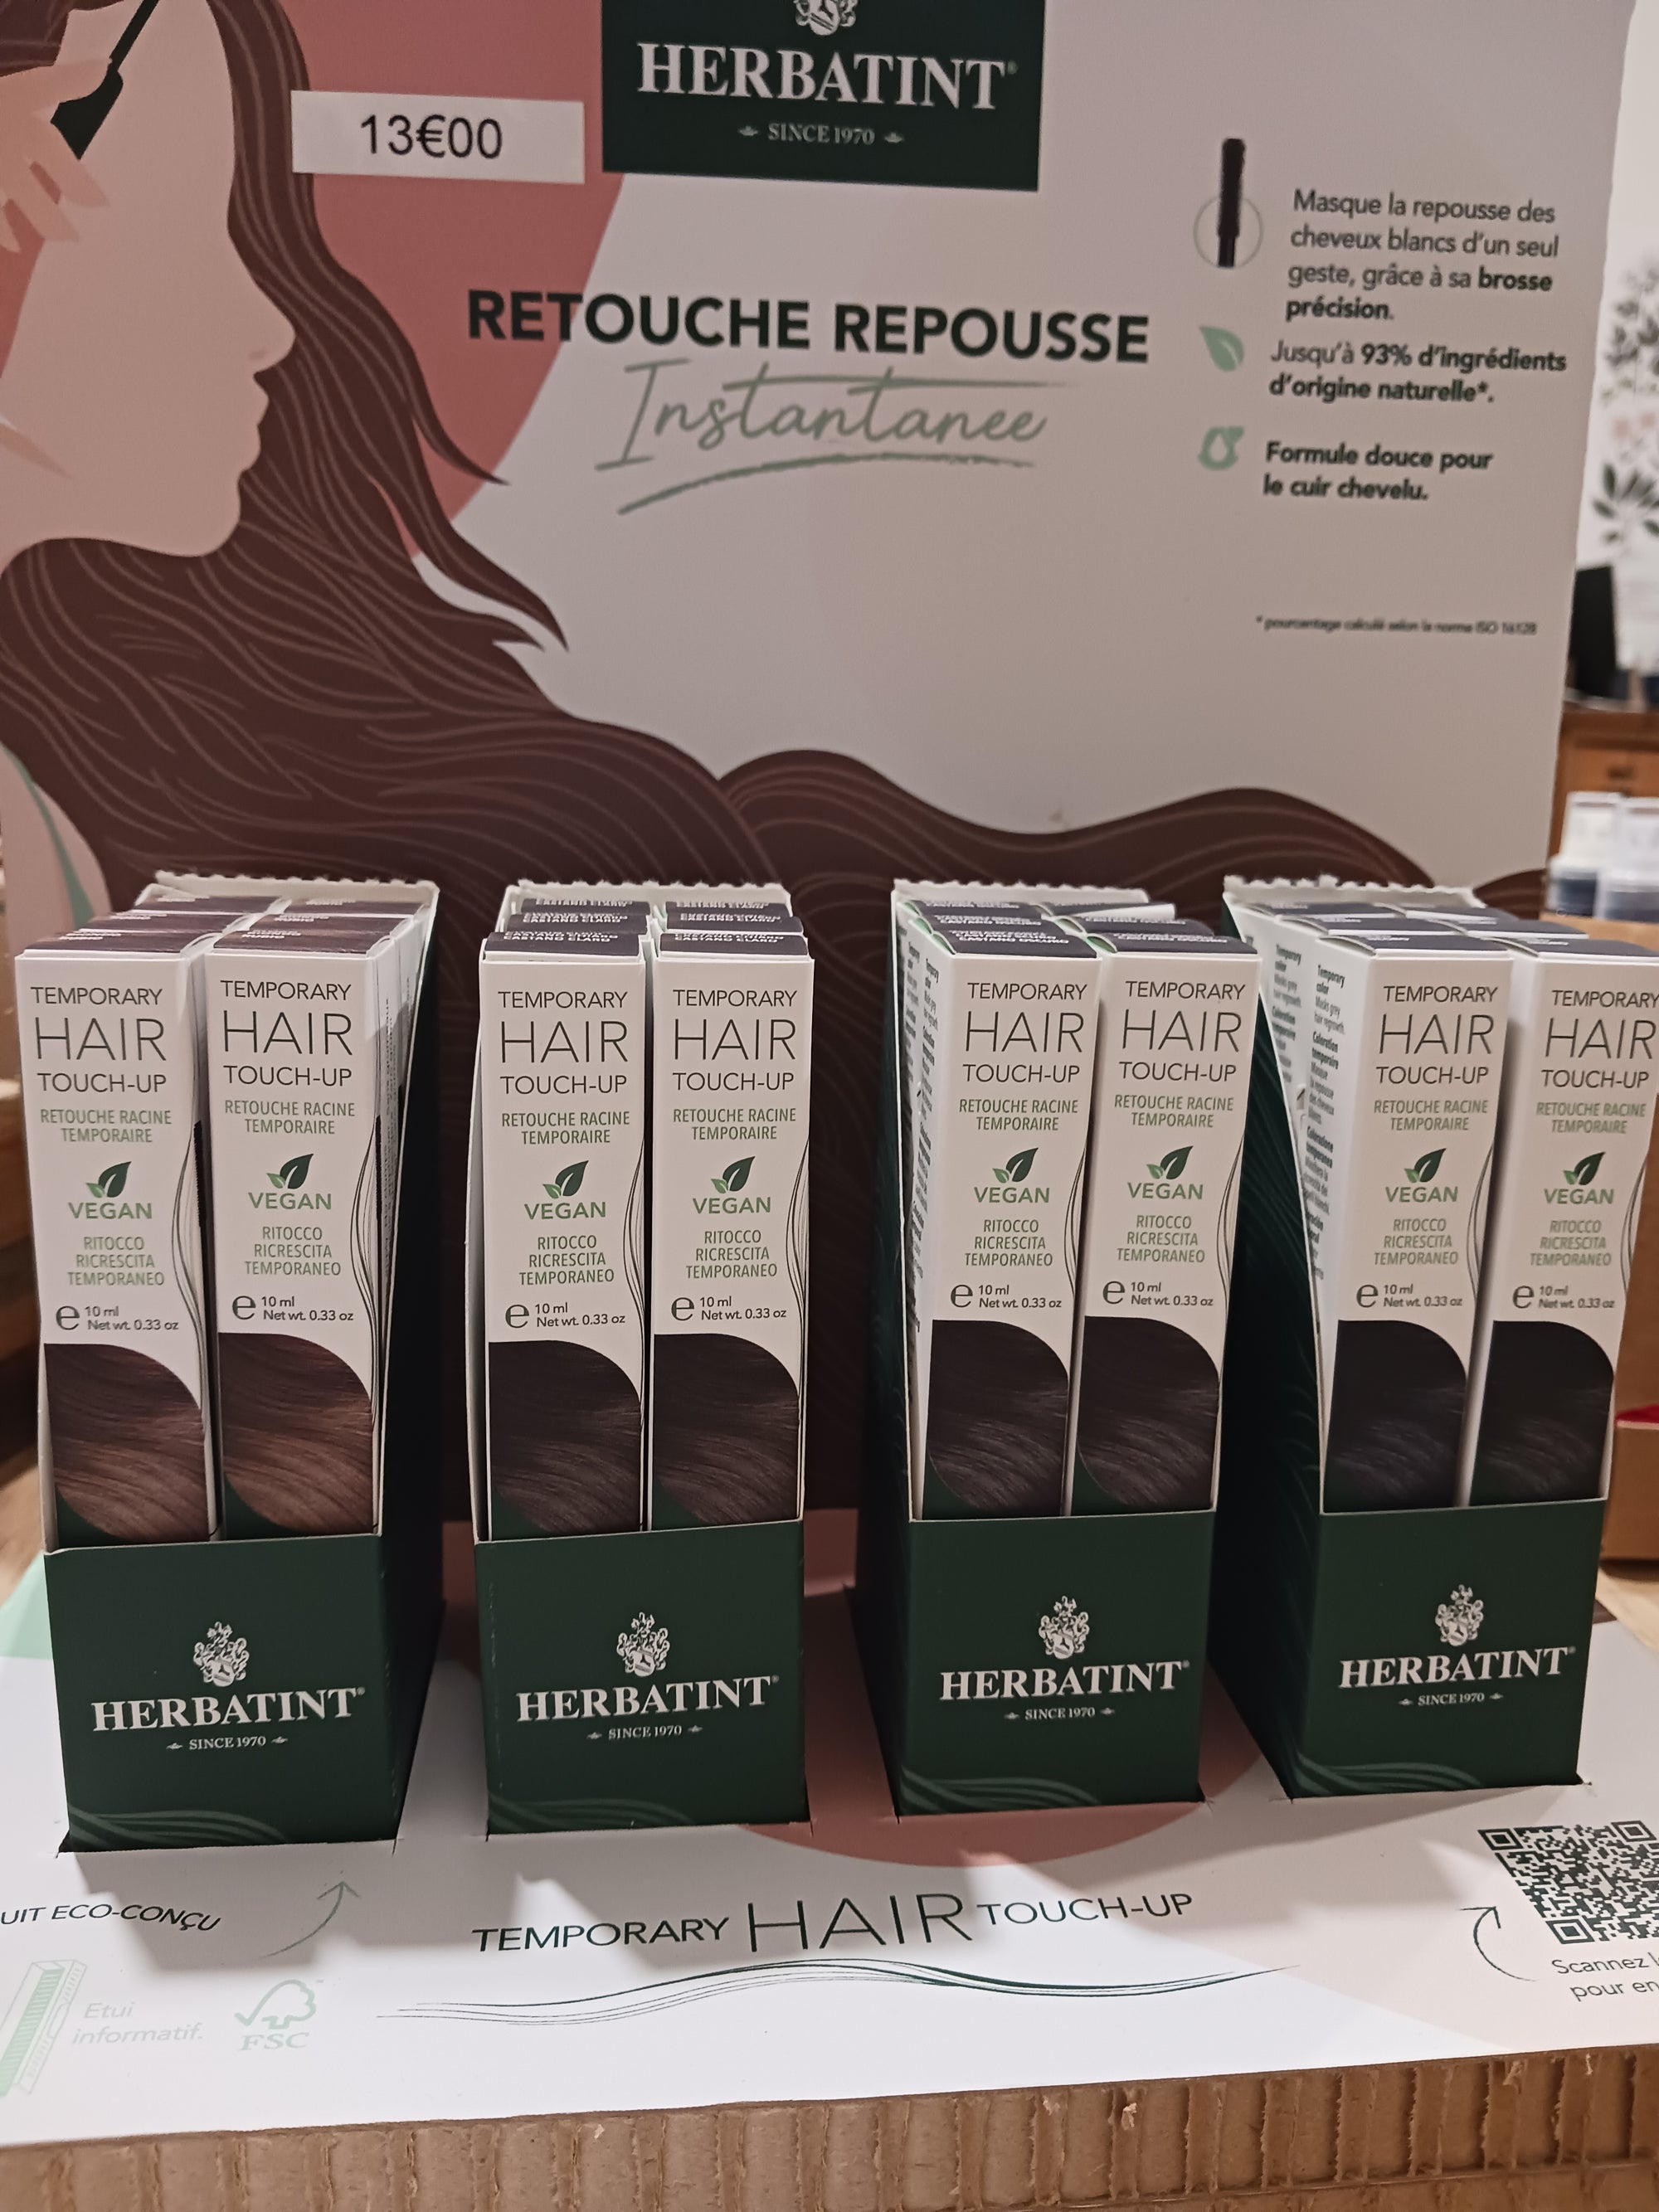 Temporary Hair Touch-up Retouche racine temporaire